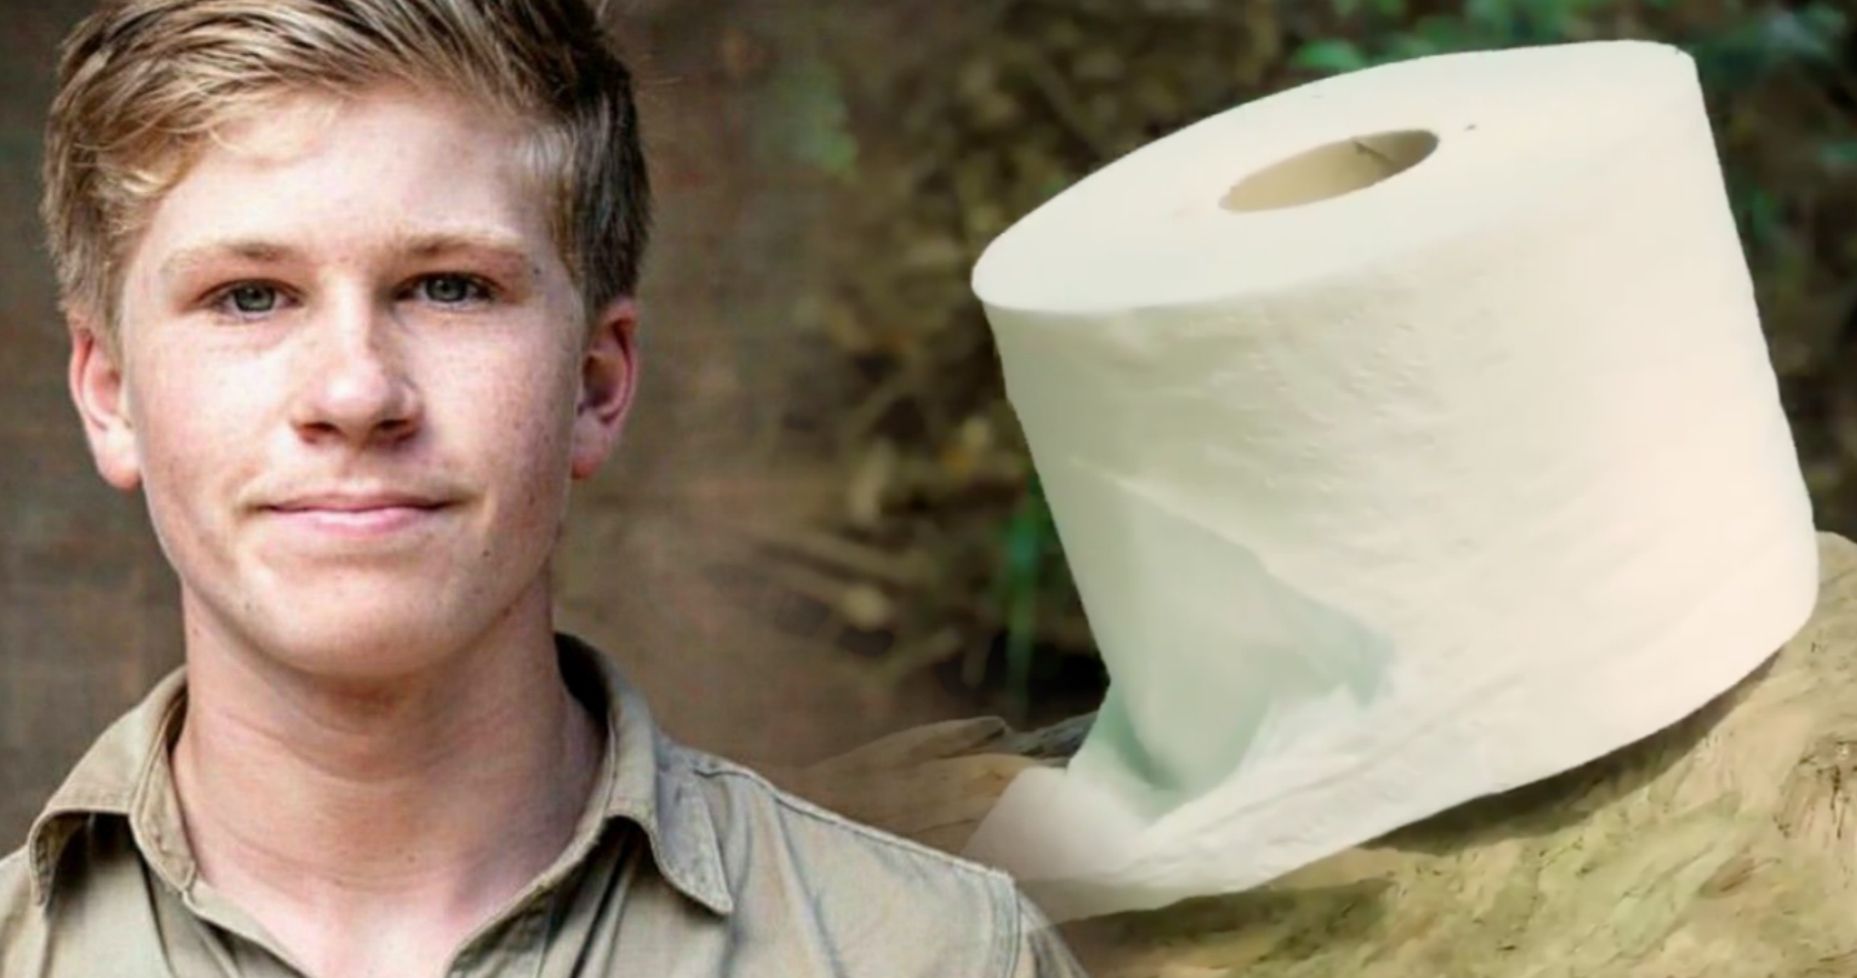 Son of The Crocodile Hunter Goes on the Ultimate Expedition to Find Toilet Paper